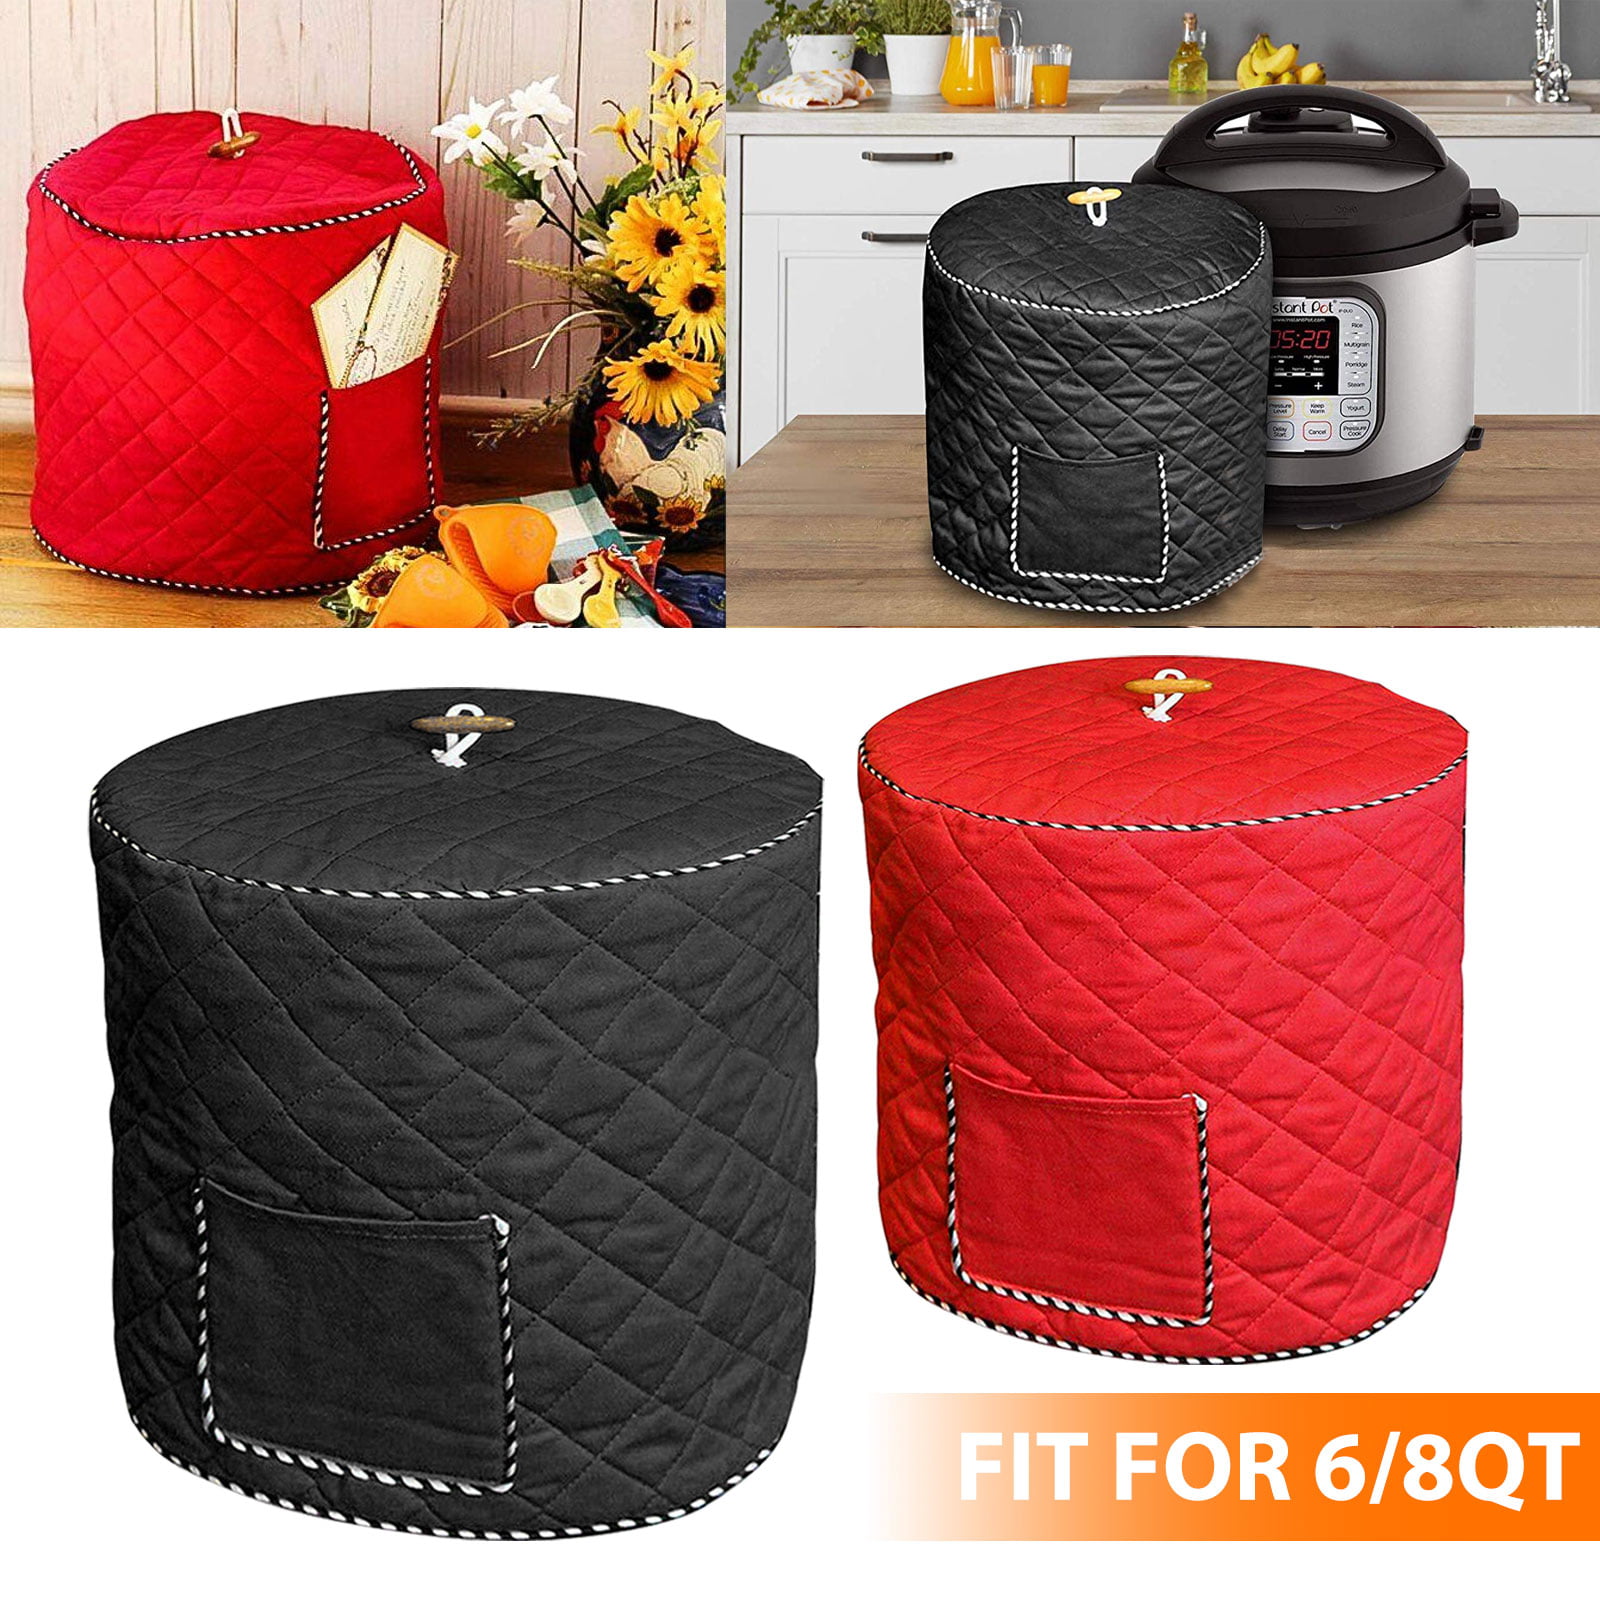 Black Decorative Appliance Cover with Pocket for Accessories Dust Proof Cover for 6 Quart Instant Pot and Electric Pressure Cooker